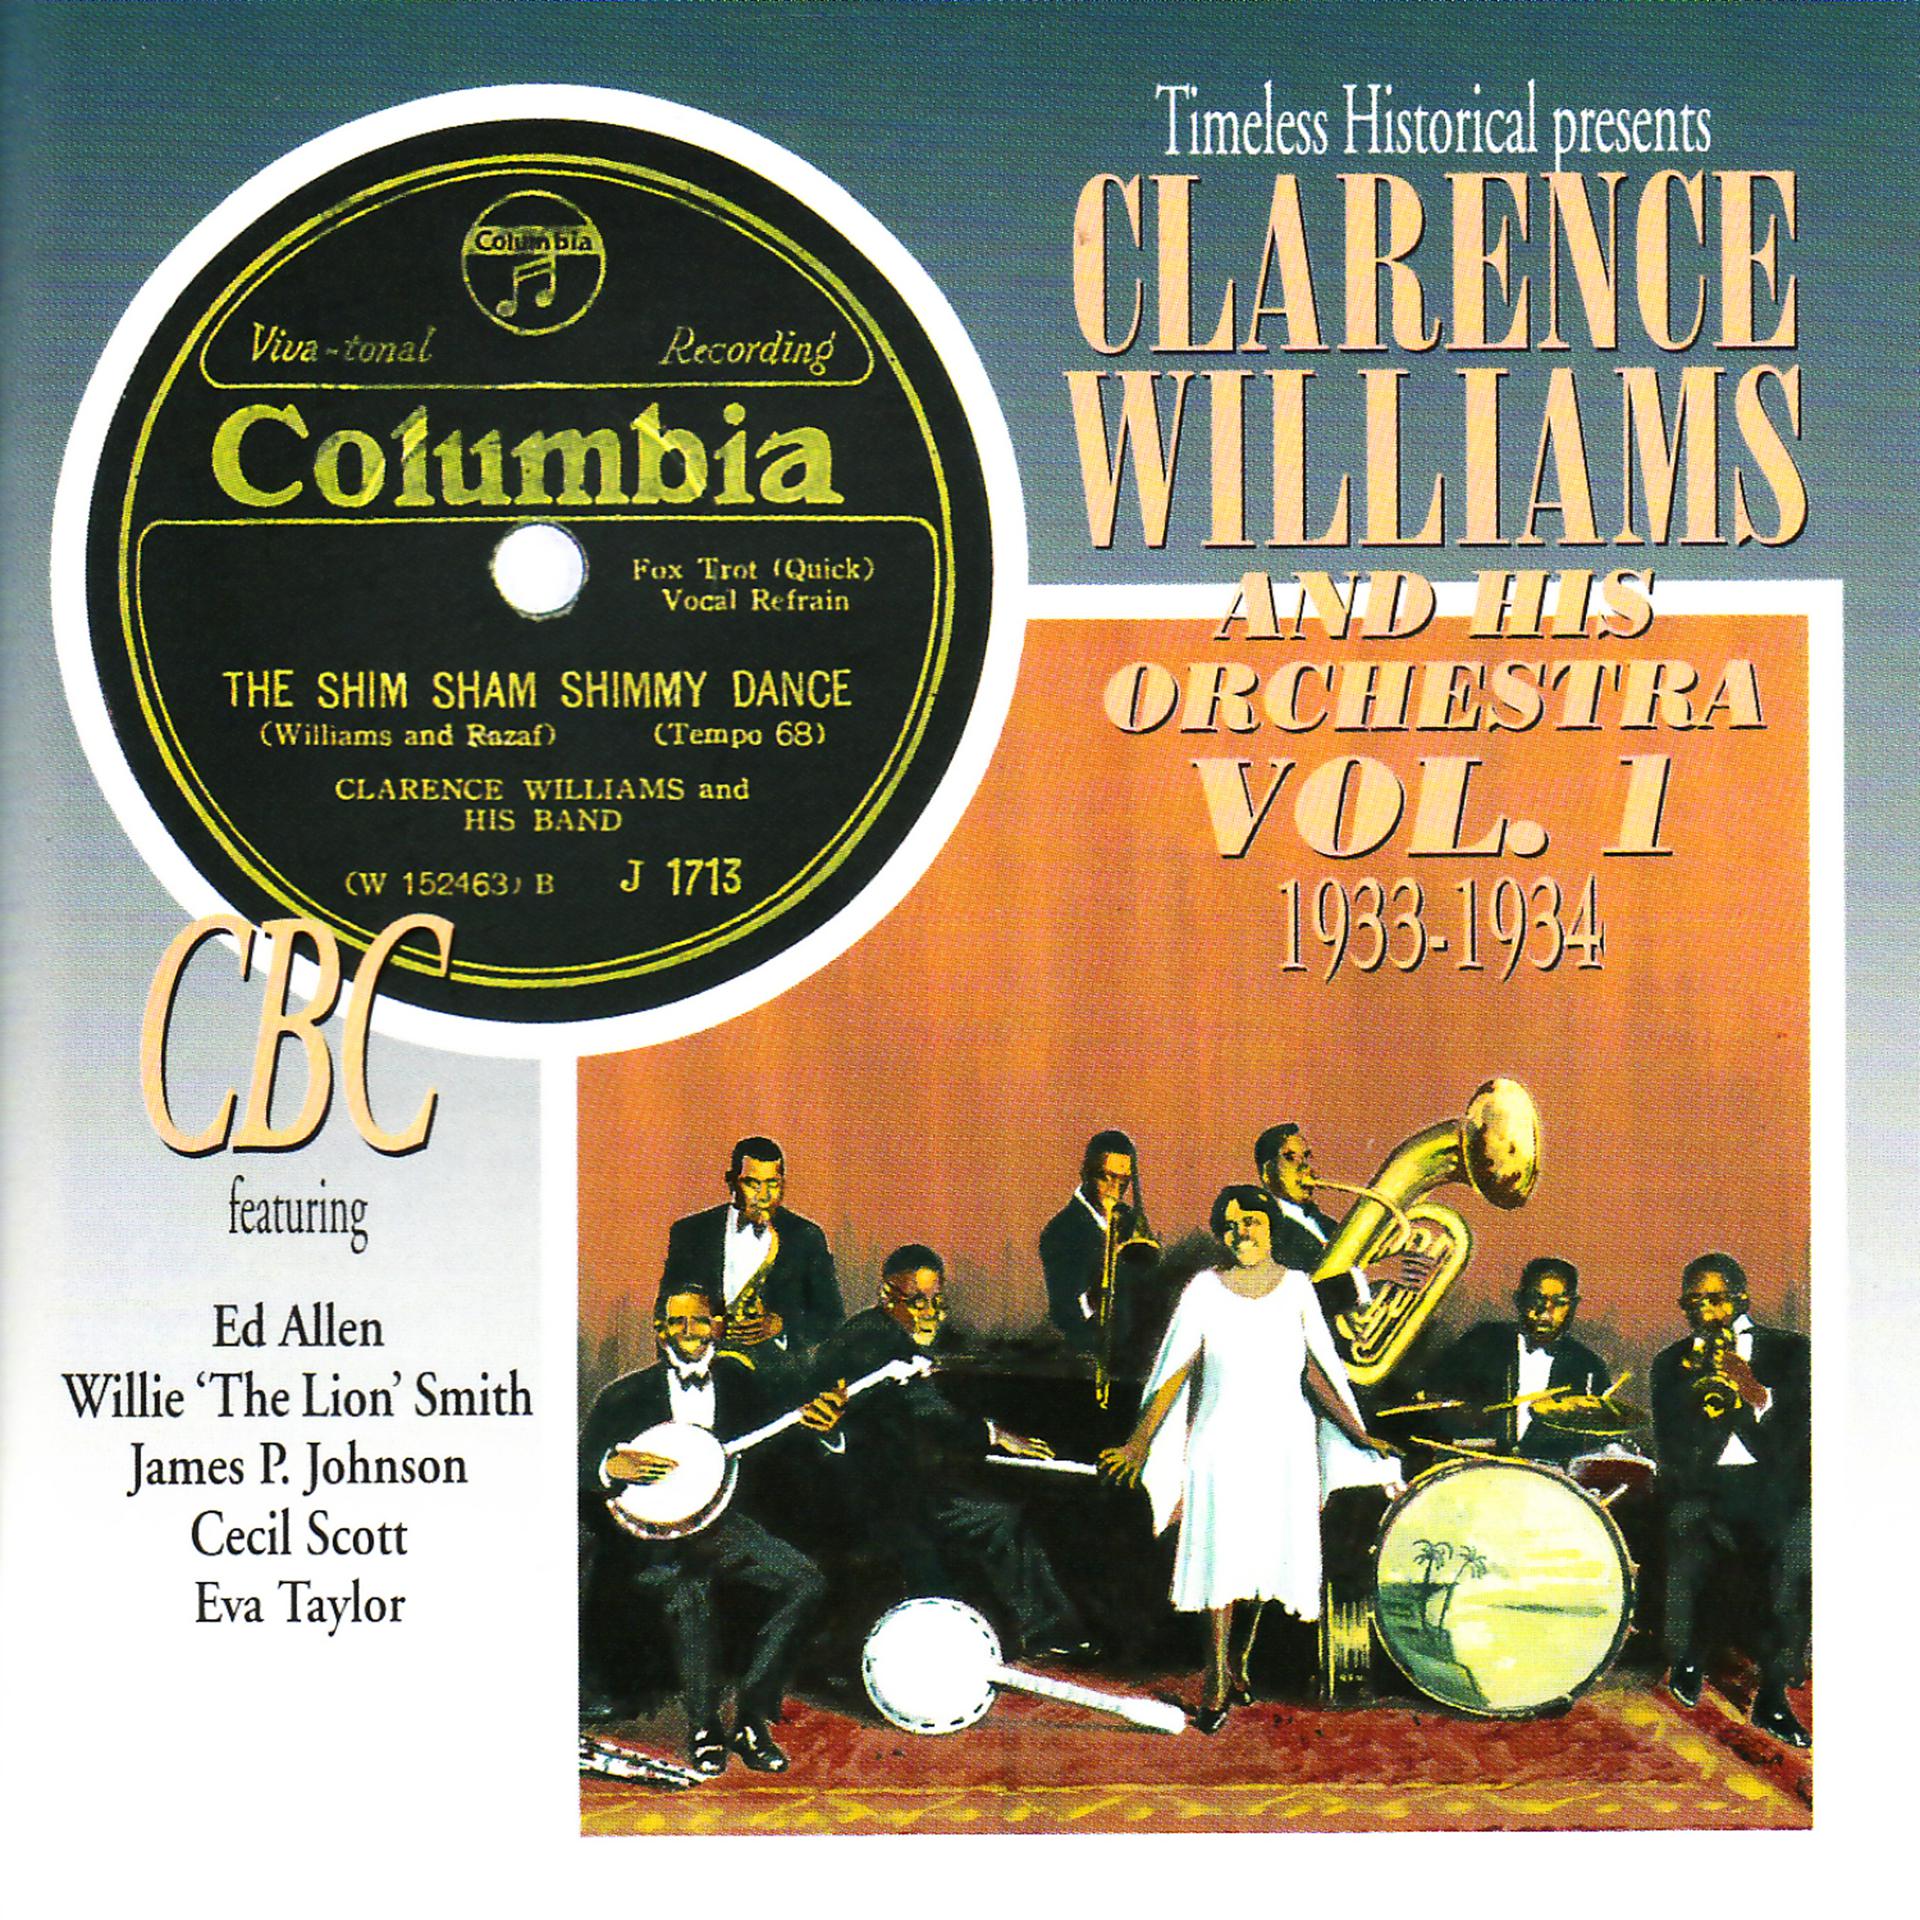 Постер альбома Clarence Williams and His Orchestra Vol. 1, 1933-1934